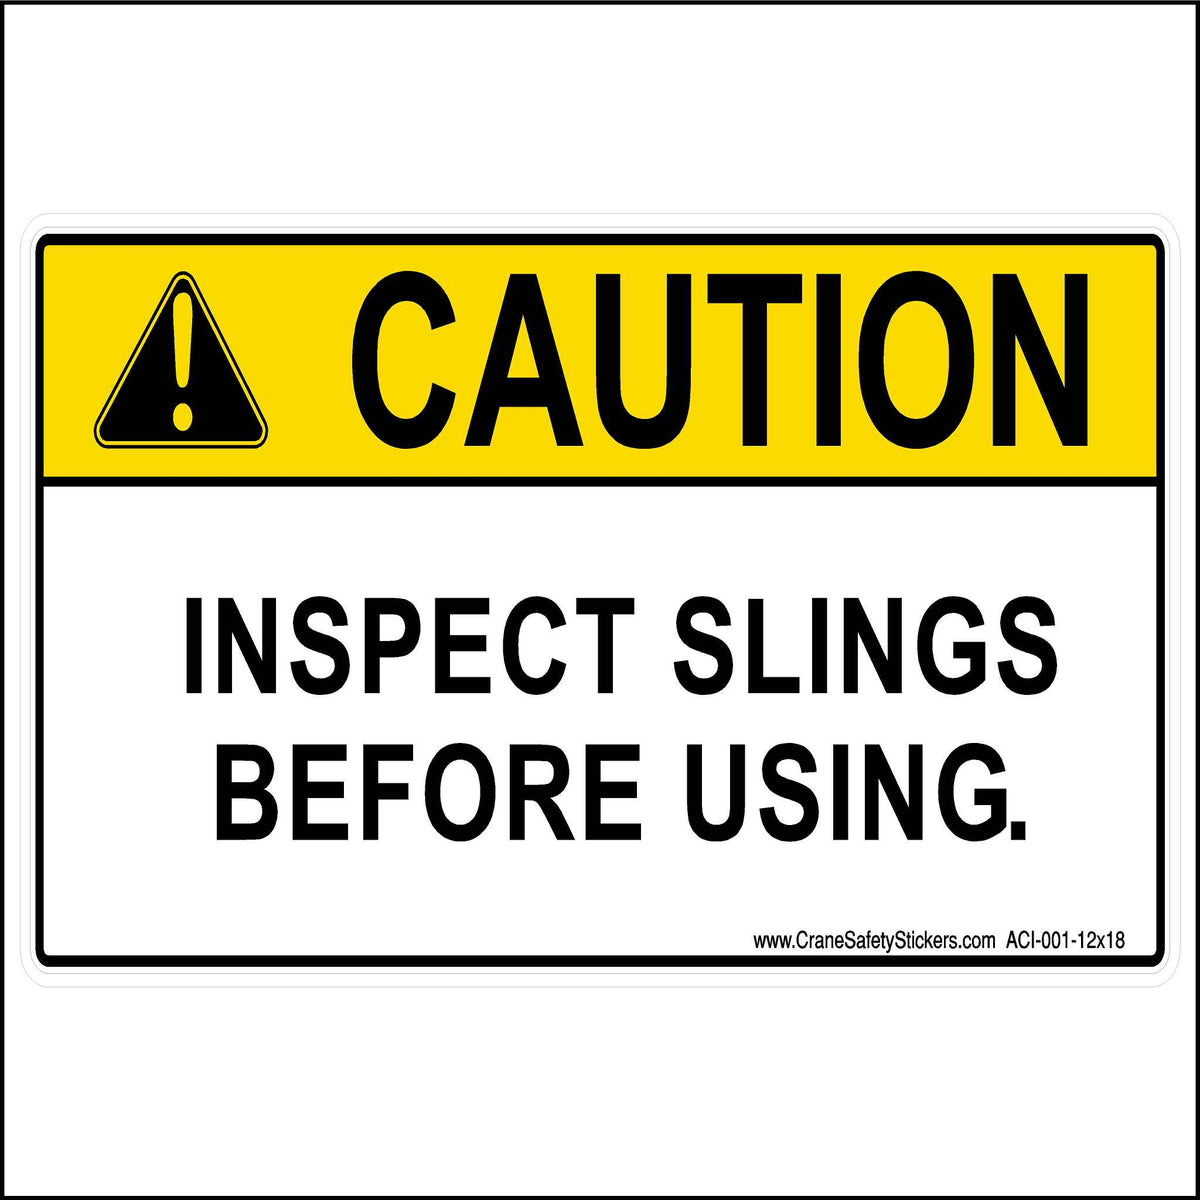 Inspect slings before use safety 12 inches by 18 inches sticker.